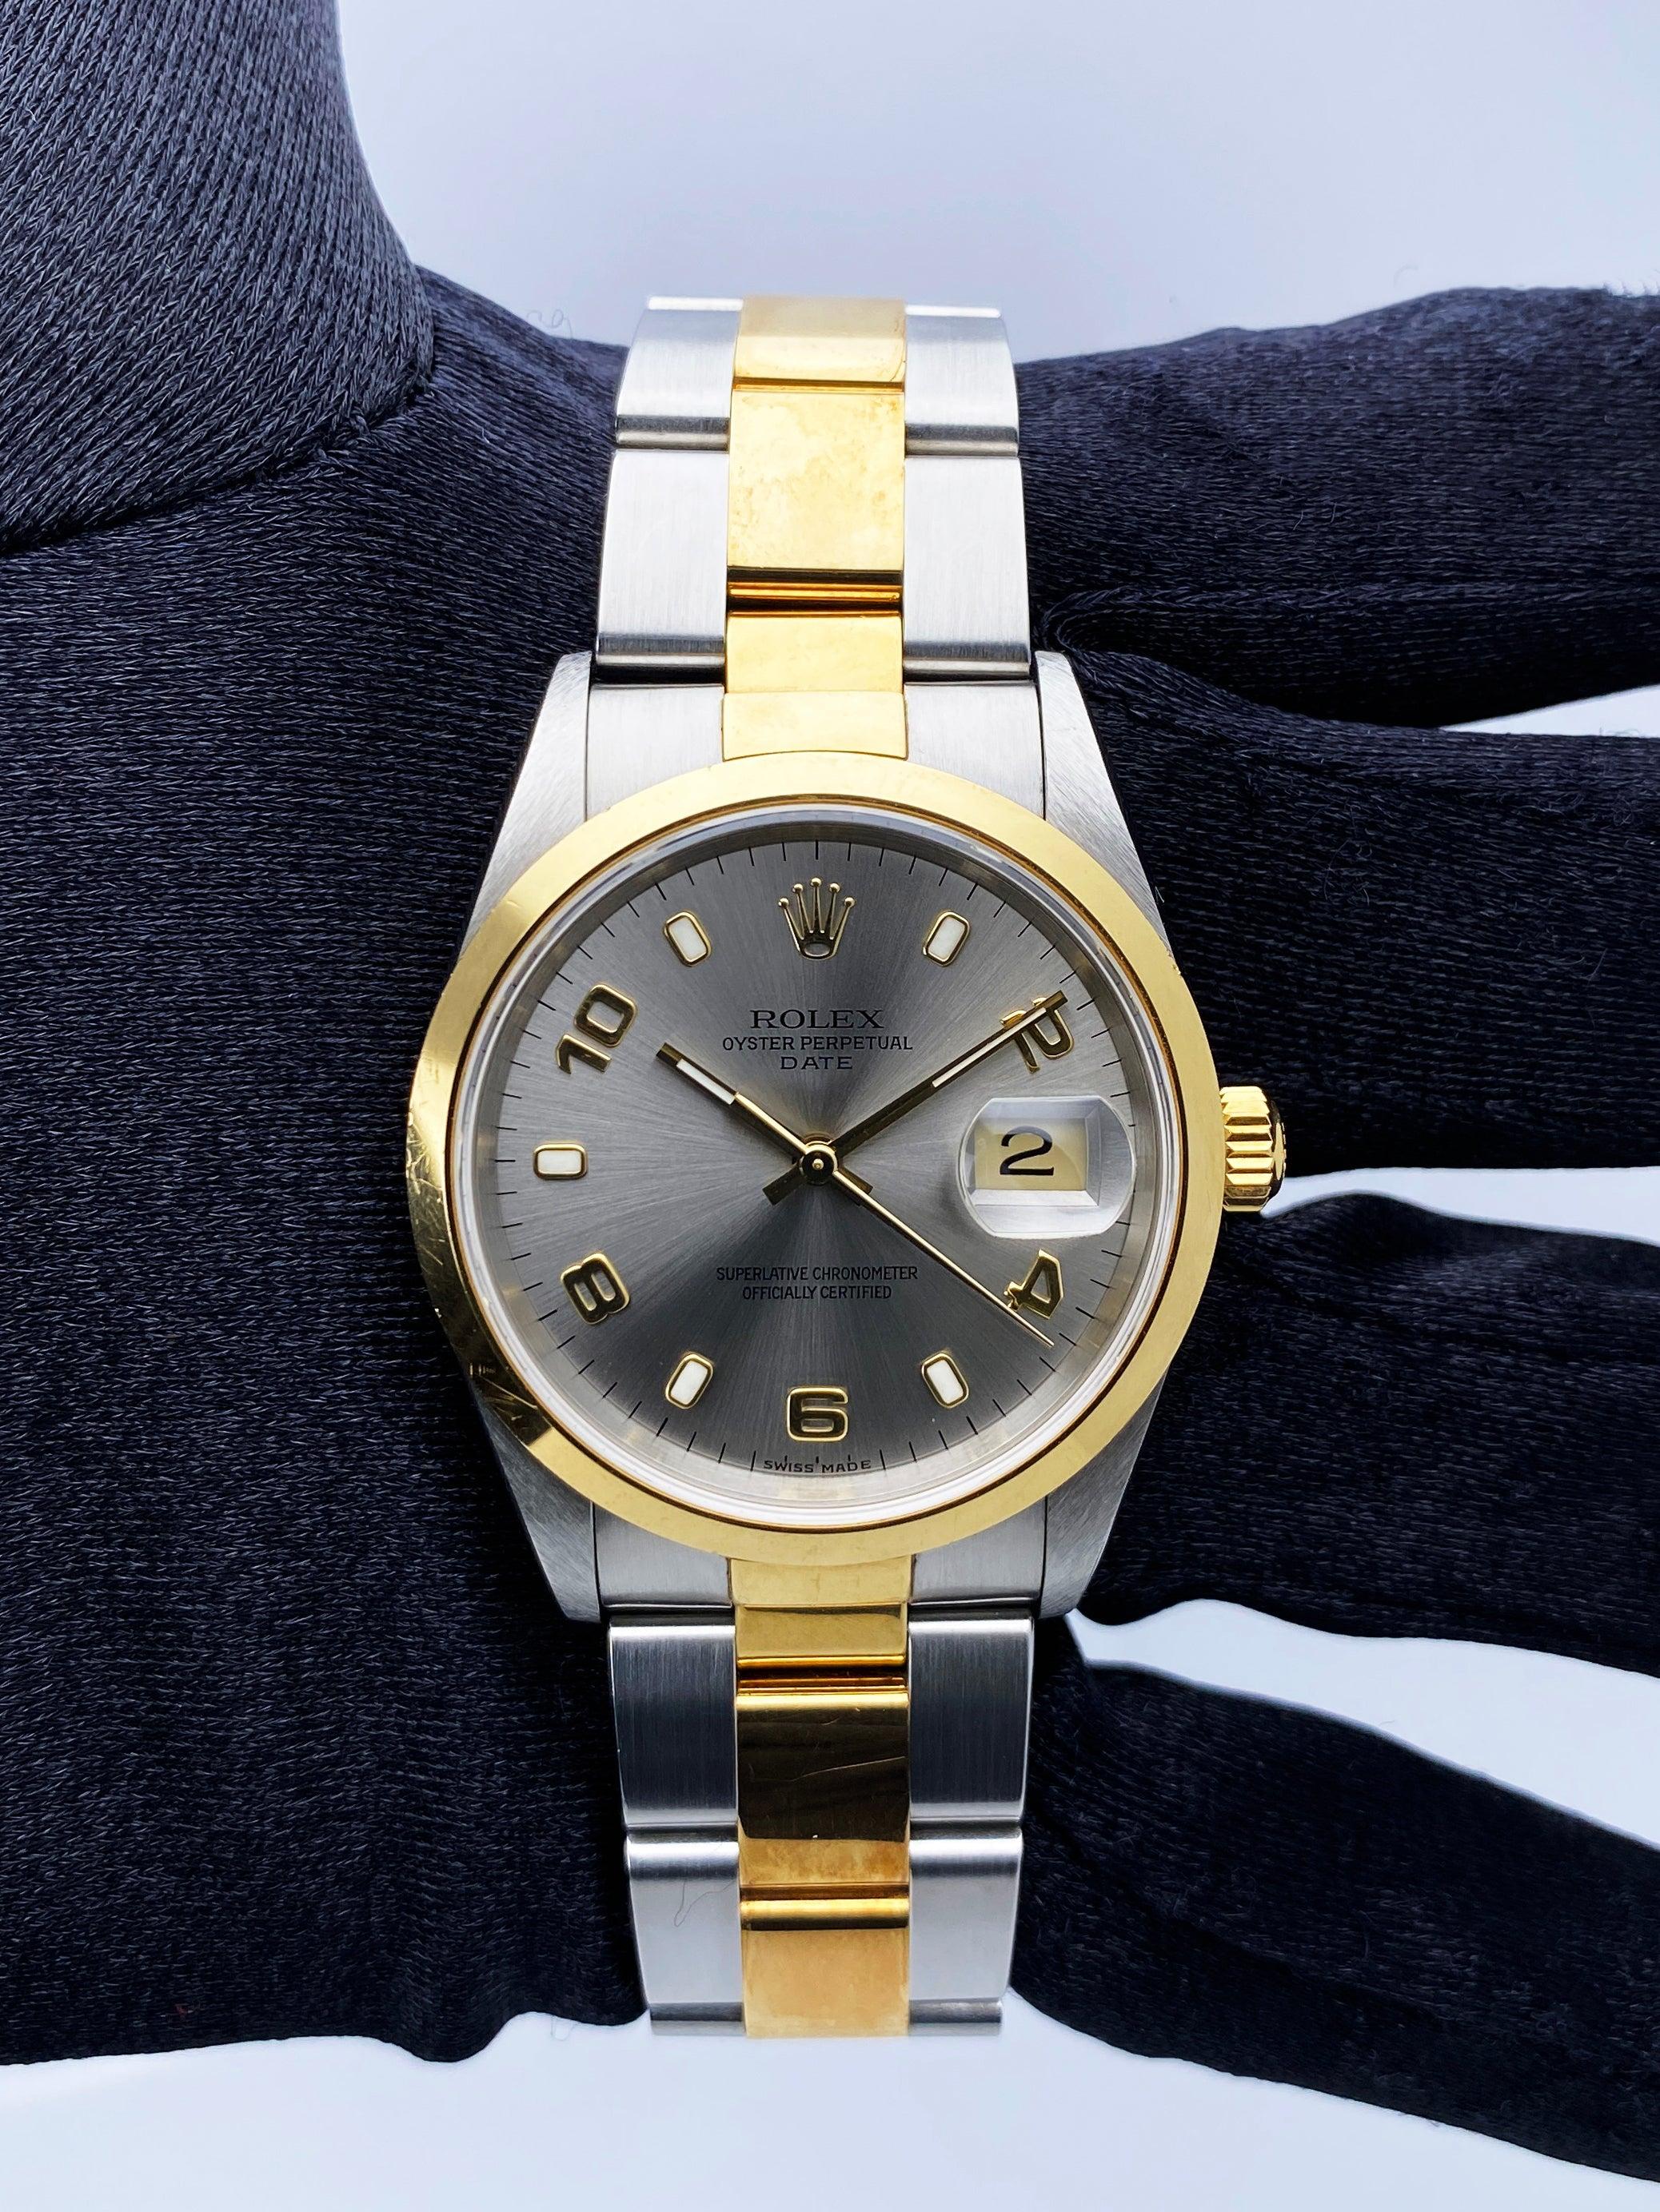 Rolex Oyster Perpetual 14203 Mens Watch. 34mm stainless steel case. 18K yellow gold smooth domed bezel. Slate dial with  luminous gold hands and Arabic numerals & index hour markers. Date display at the 3 o'clock position. Stainless steel and 18K